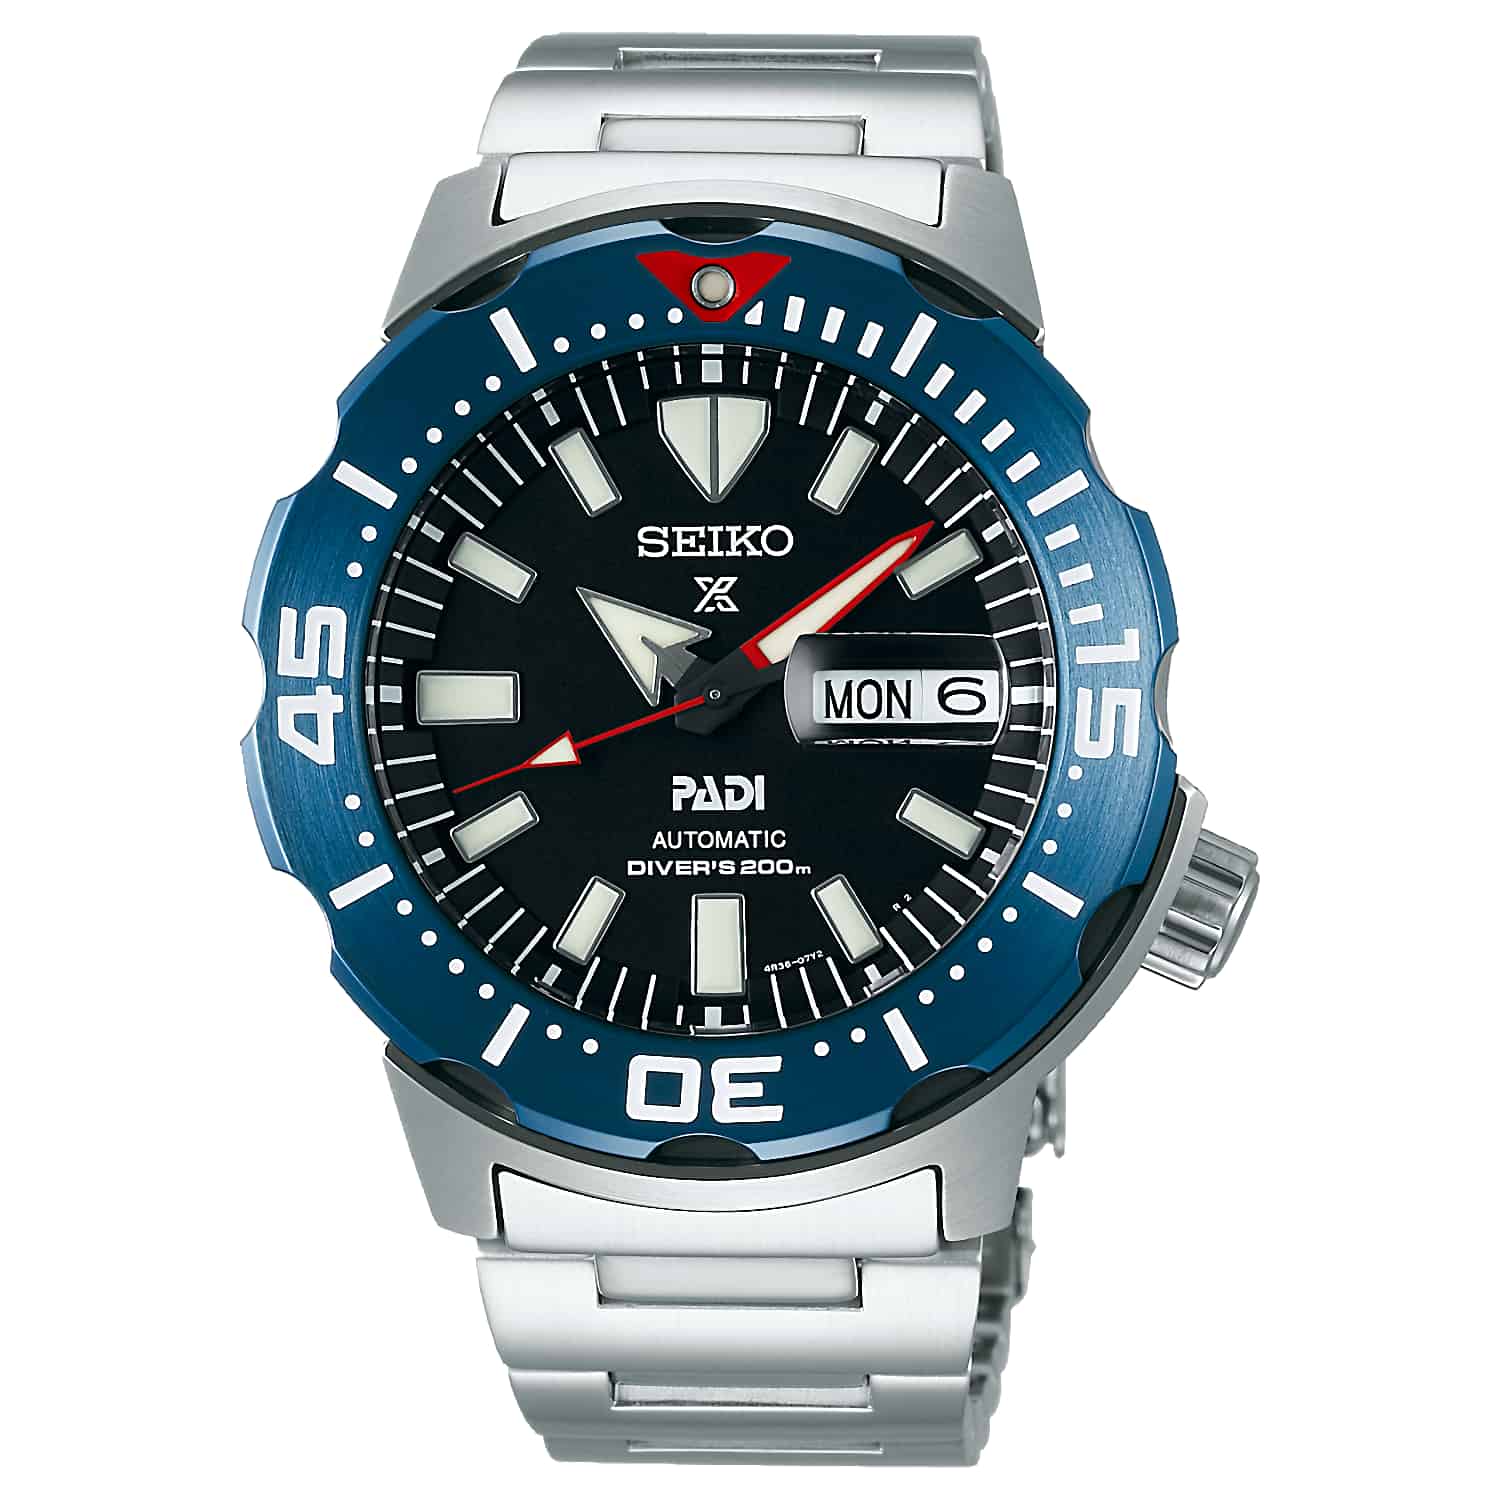 SRPE27K1 SEIKO Prospex PADI Automatic Divers Special Edition Watch.  The return of the Monster case, with the cool PADI colour scheme. The Seiko Monster has been updated, it remains faithful to the original 2001 concept and doesn’t lose its aggressive, bo